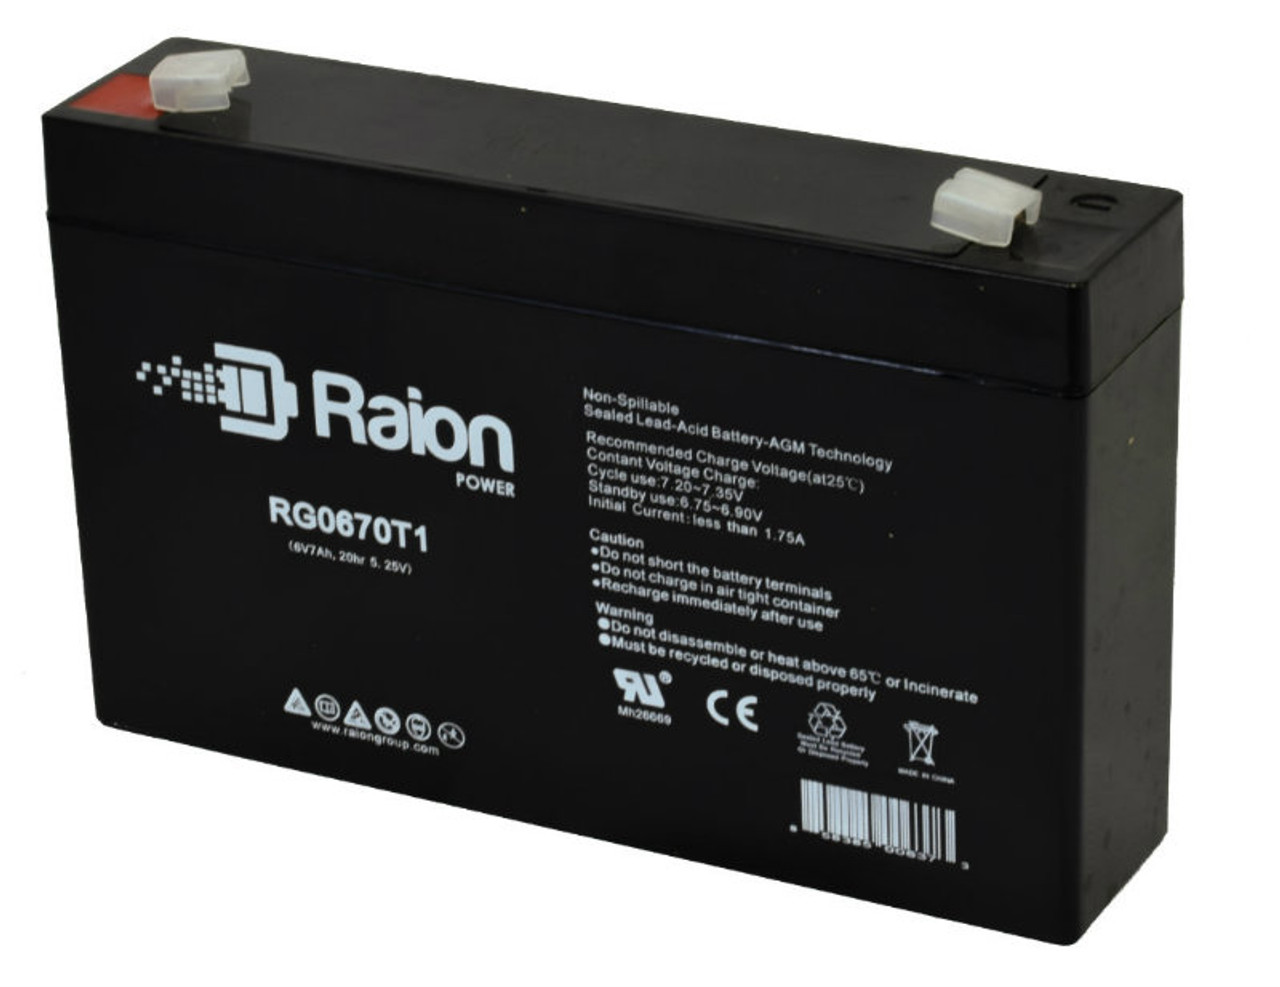 Raion Power RG0670T1 6V 7Ah Replacement Emergency Lighting Battery for National Power GS013P2